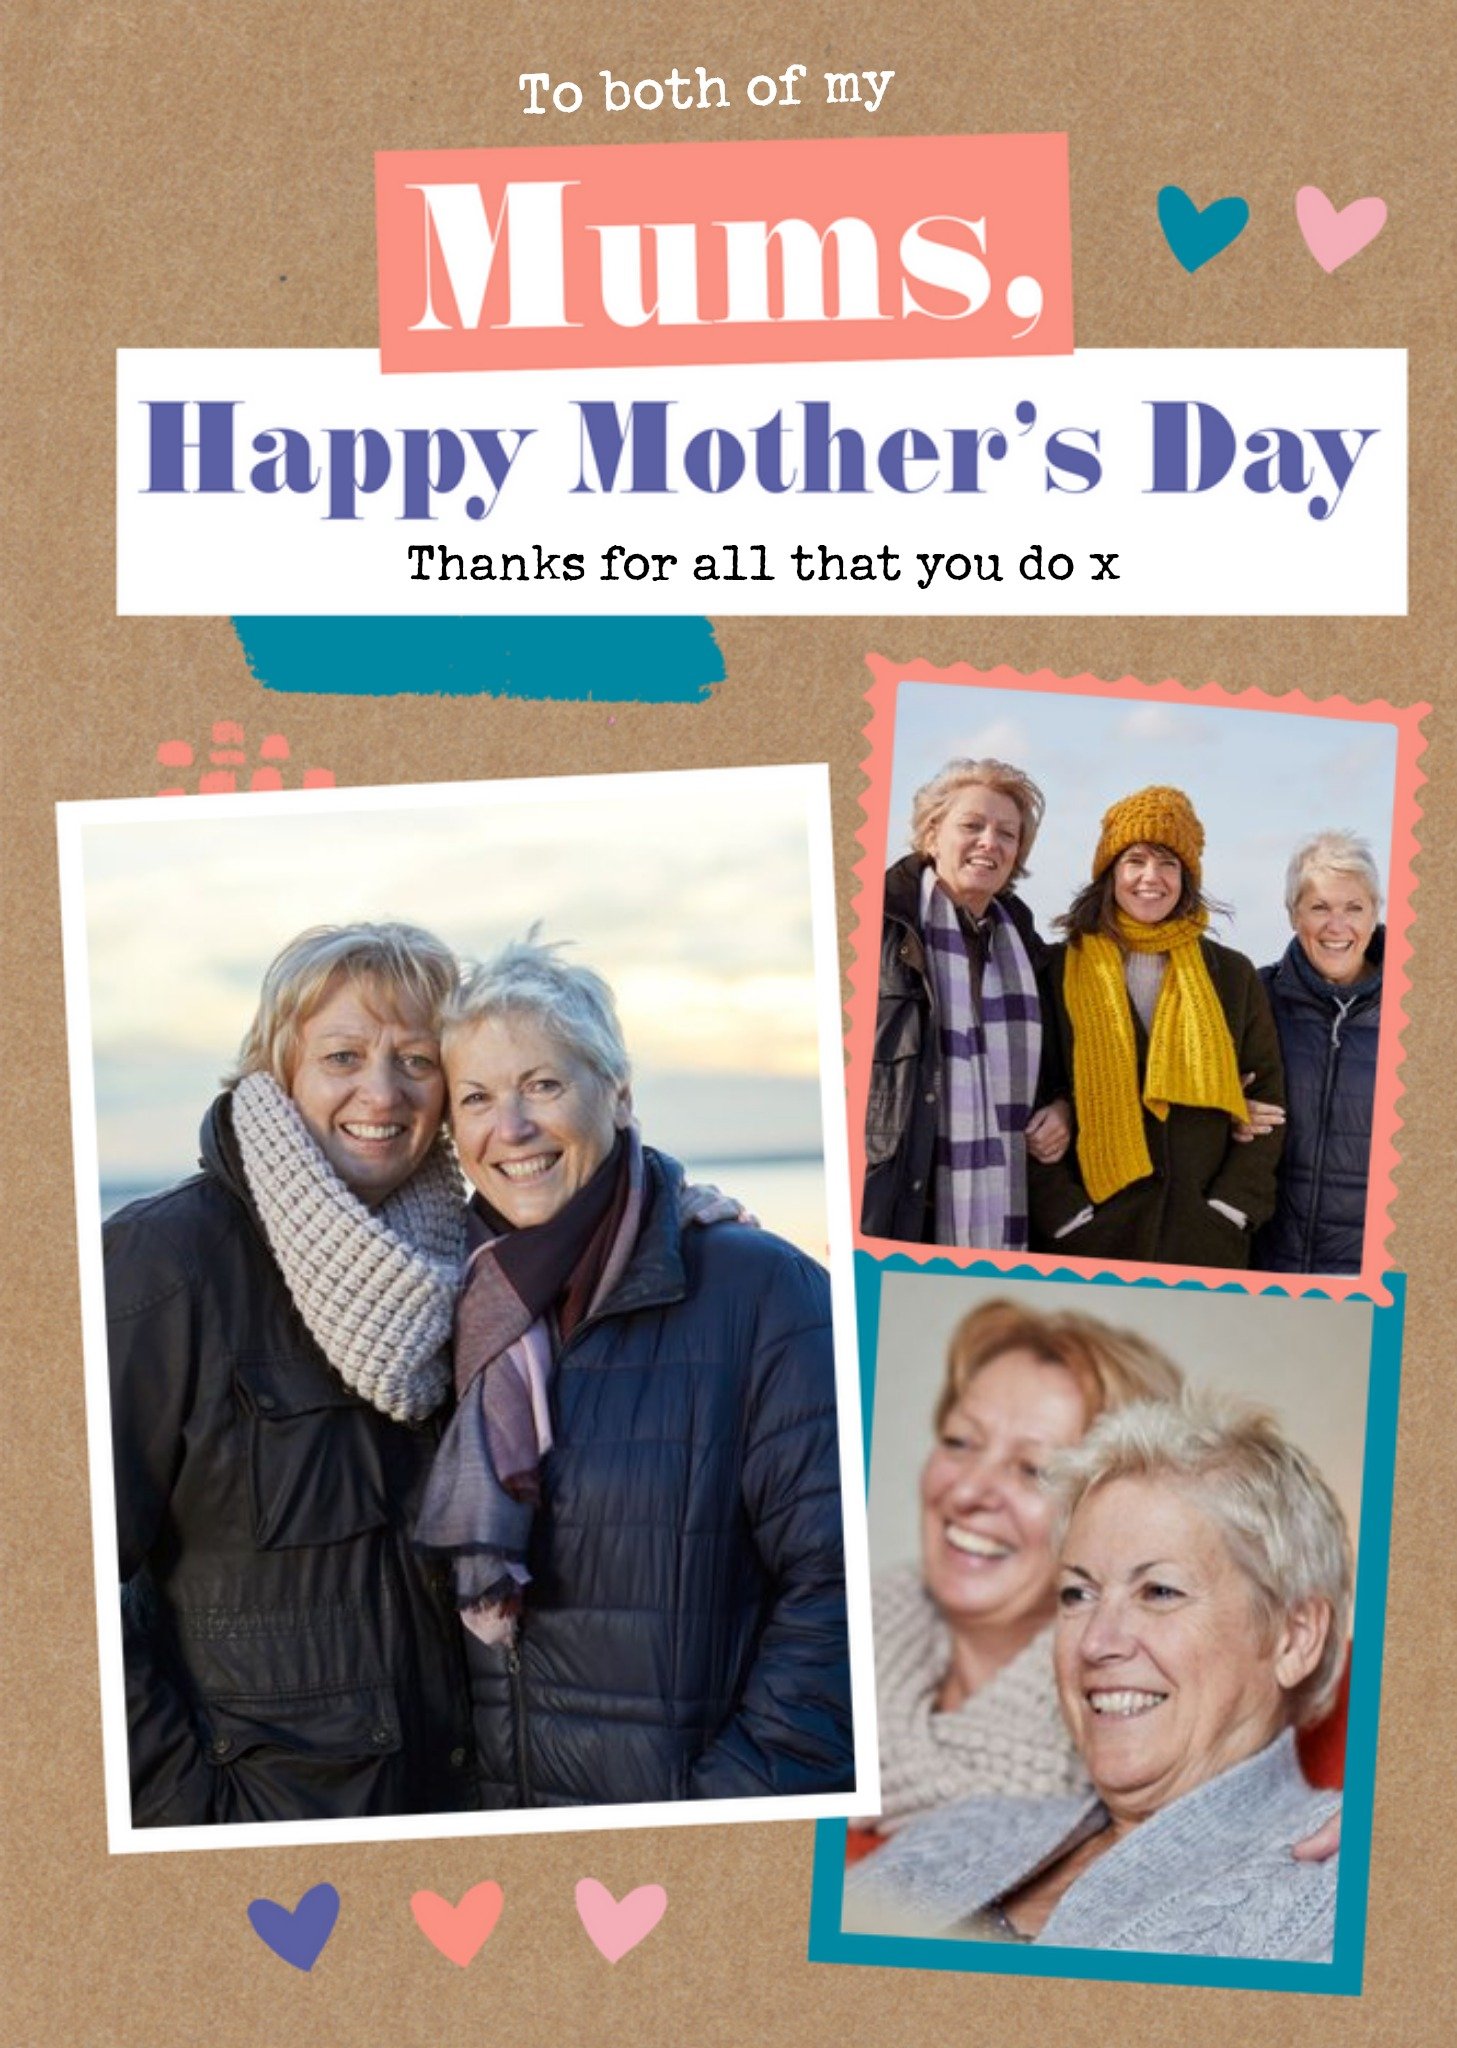 Moonpig Modern Photo Upload Collage Two Mums Same Sex Parents LGBTQ+ Mothers Day Card Ecard